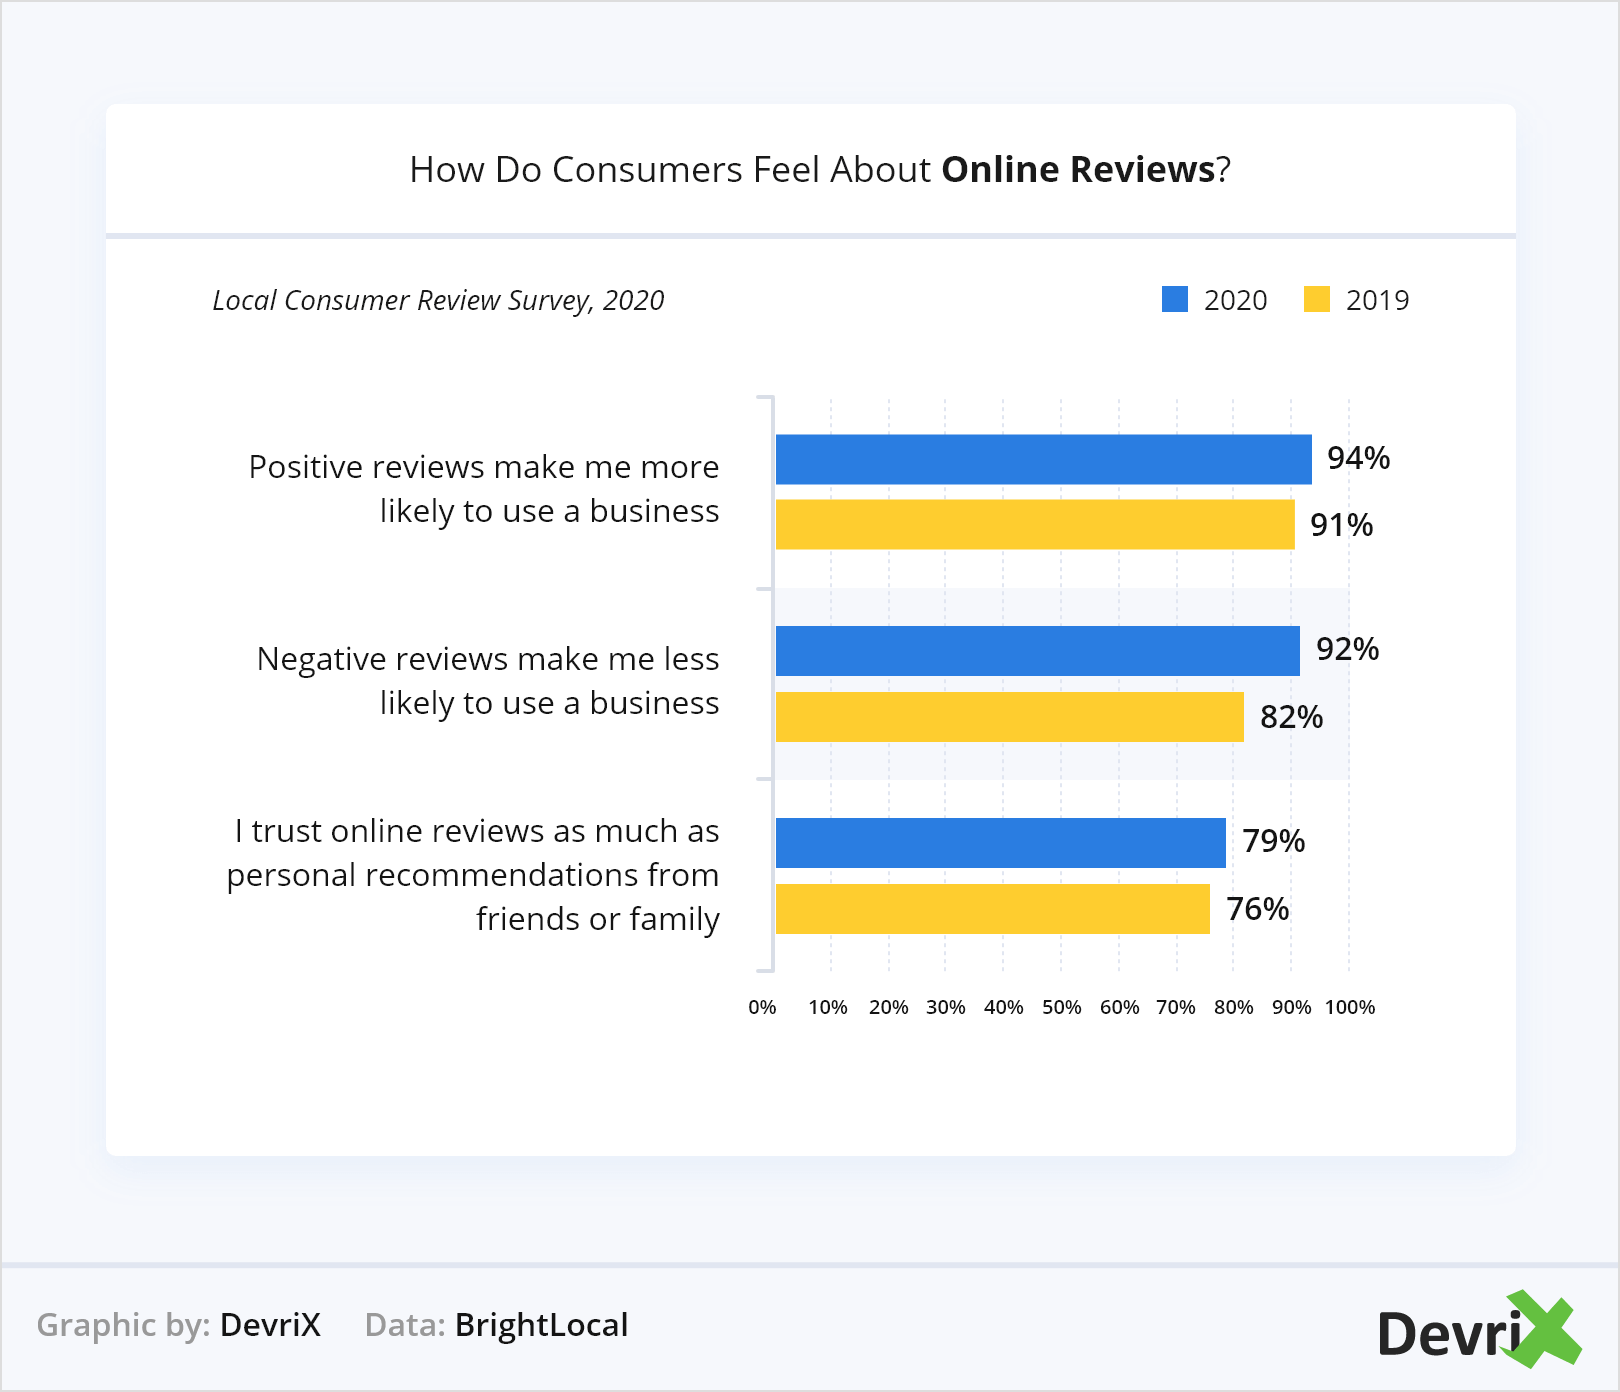 How Do Consumers Feel About Online Reviews